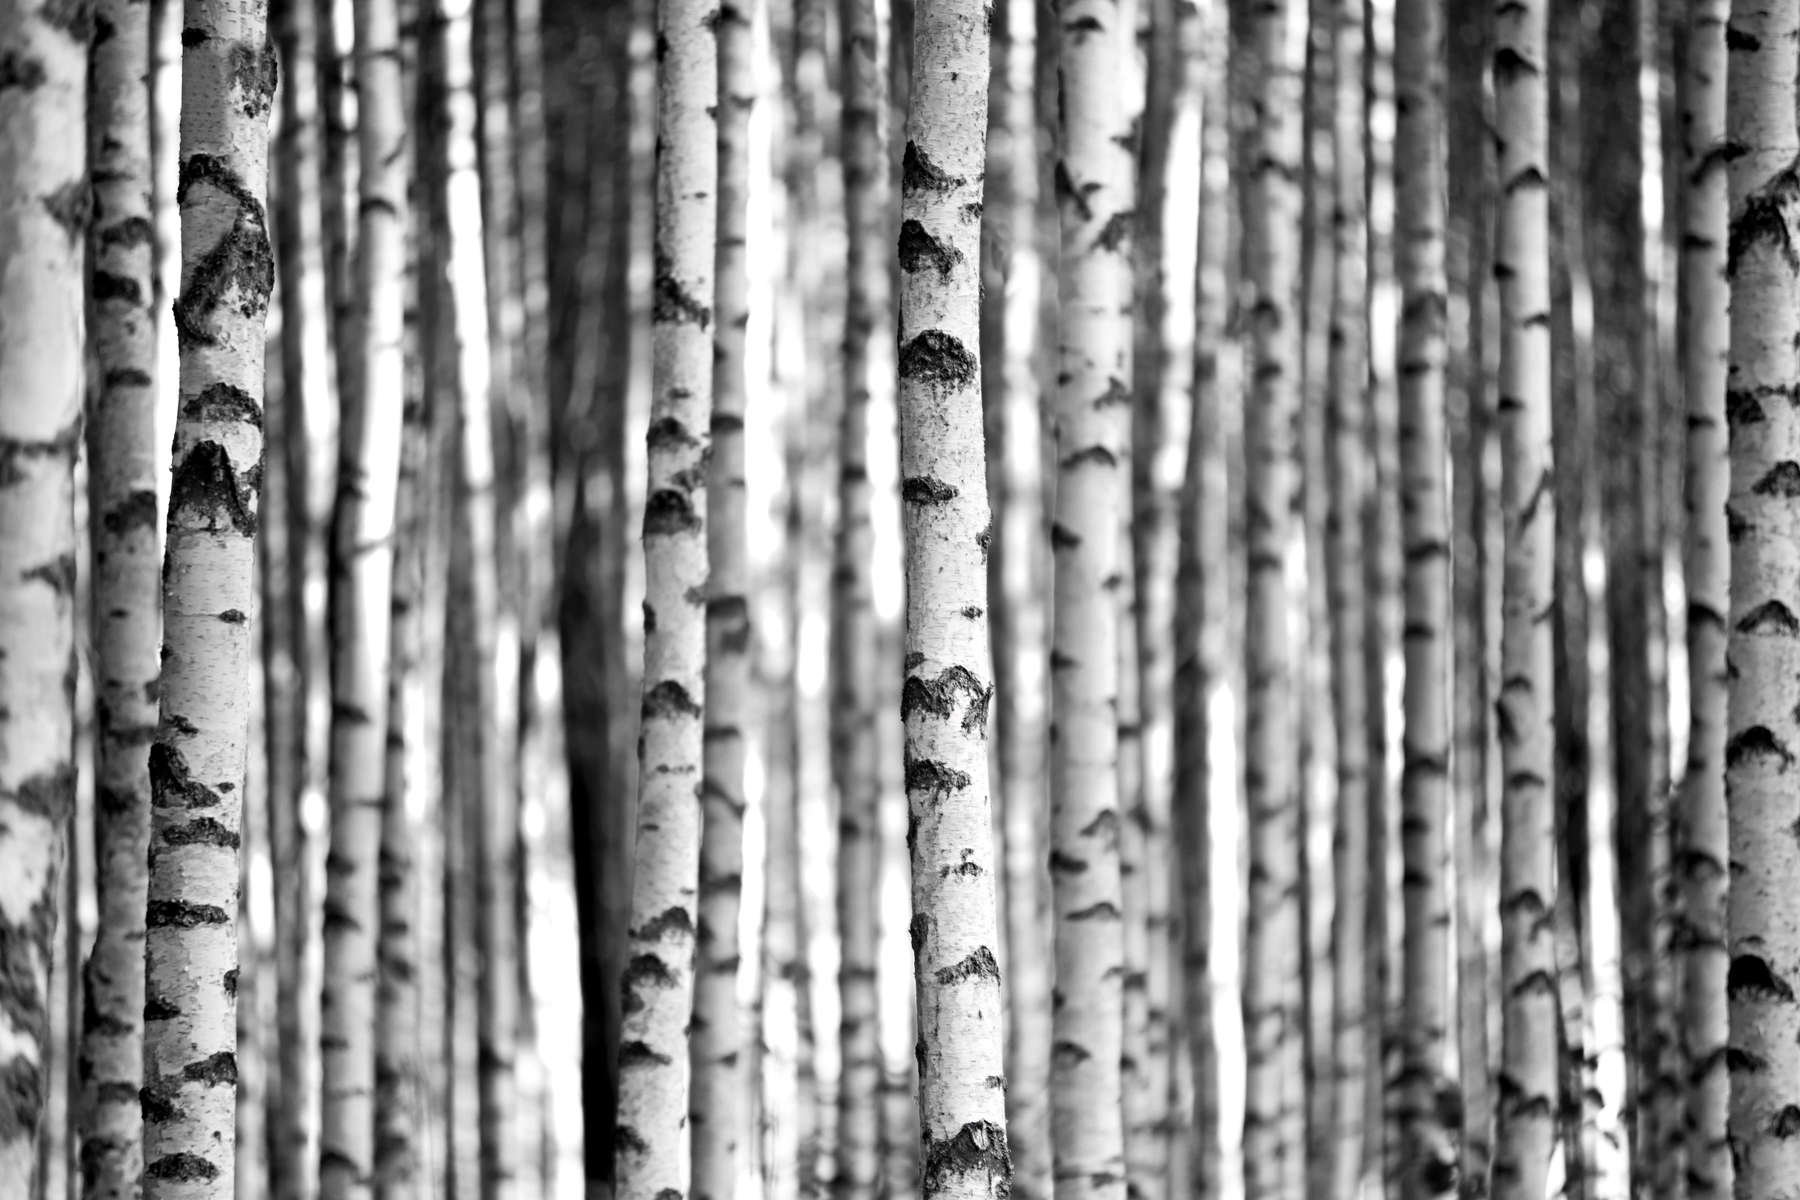 Birch trees in black and white